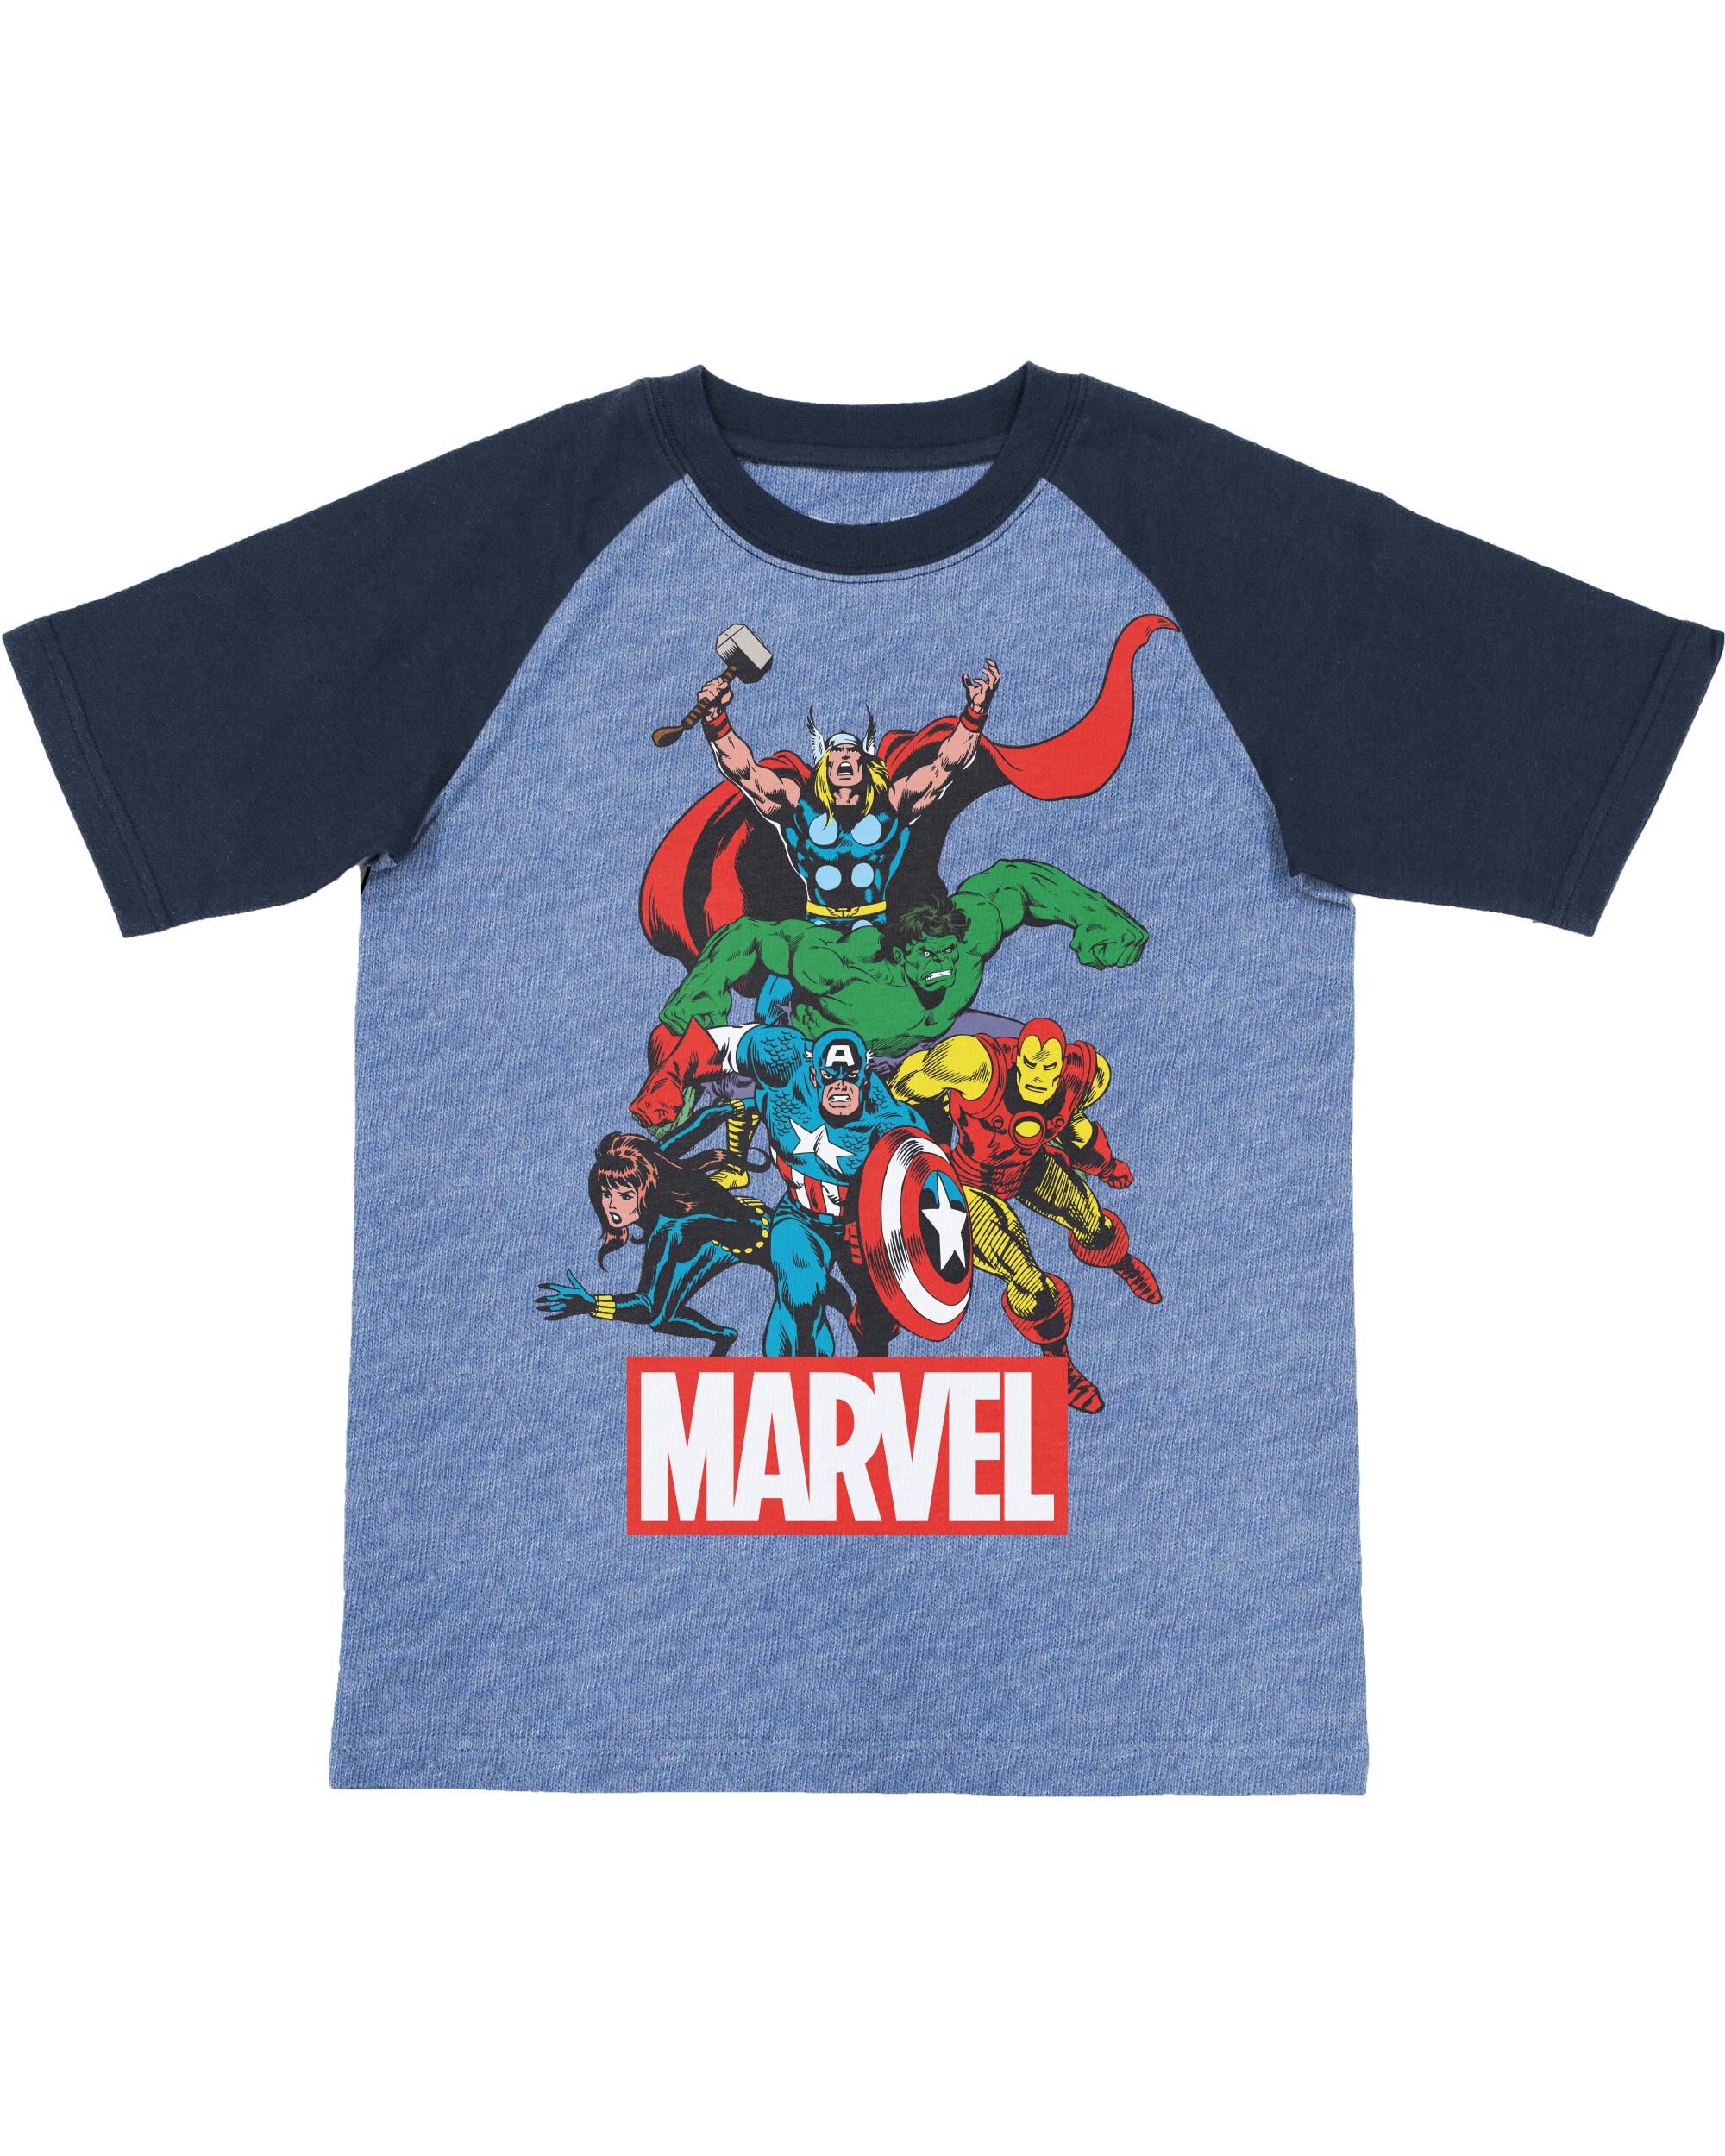 Marvel Comics Avengers Baby Blue Heroes T-Shirt Sizes 18 Months 3T NWT 